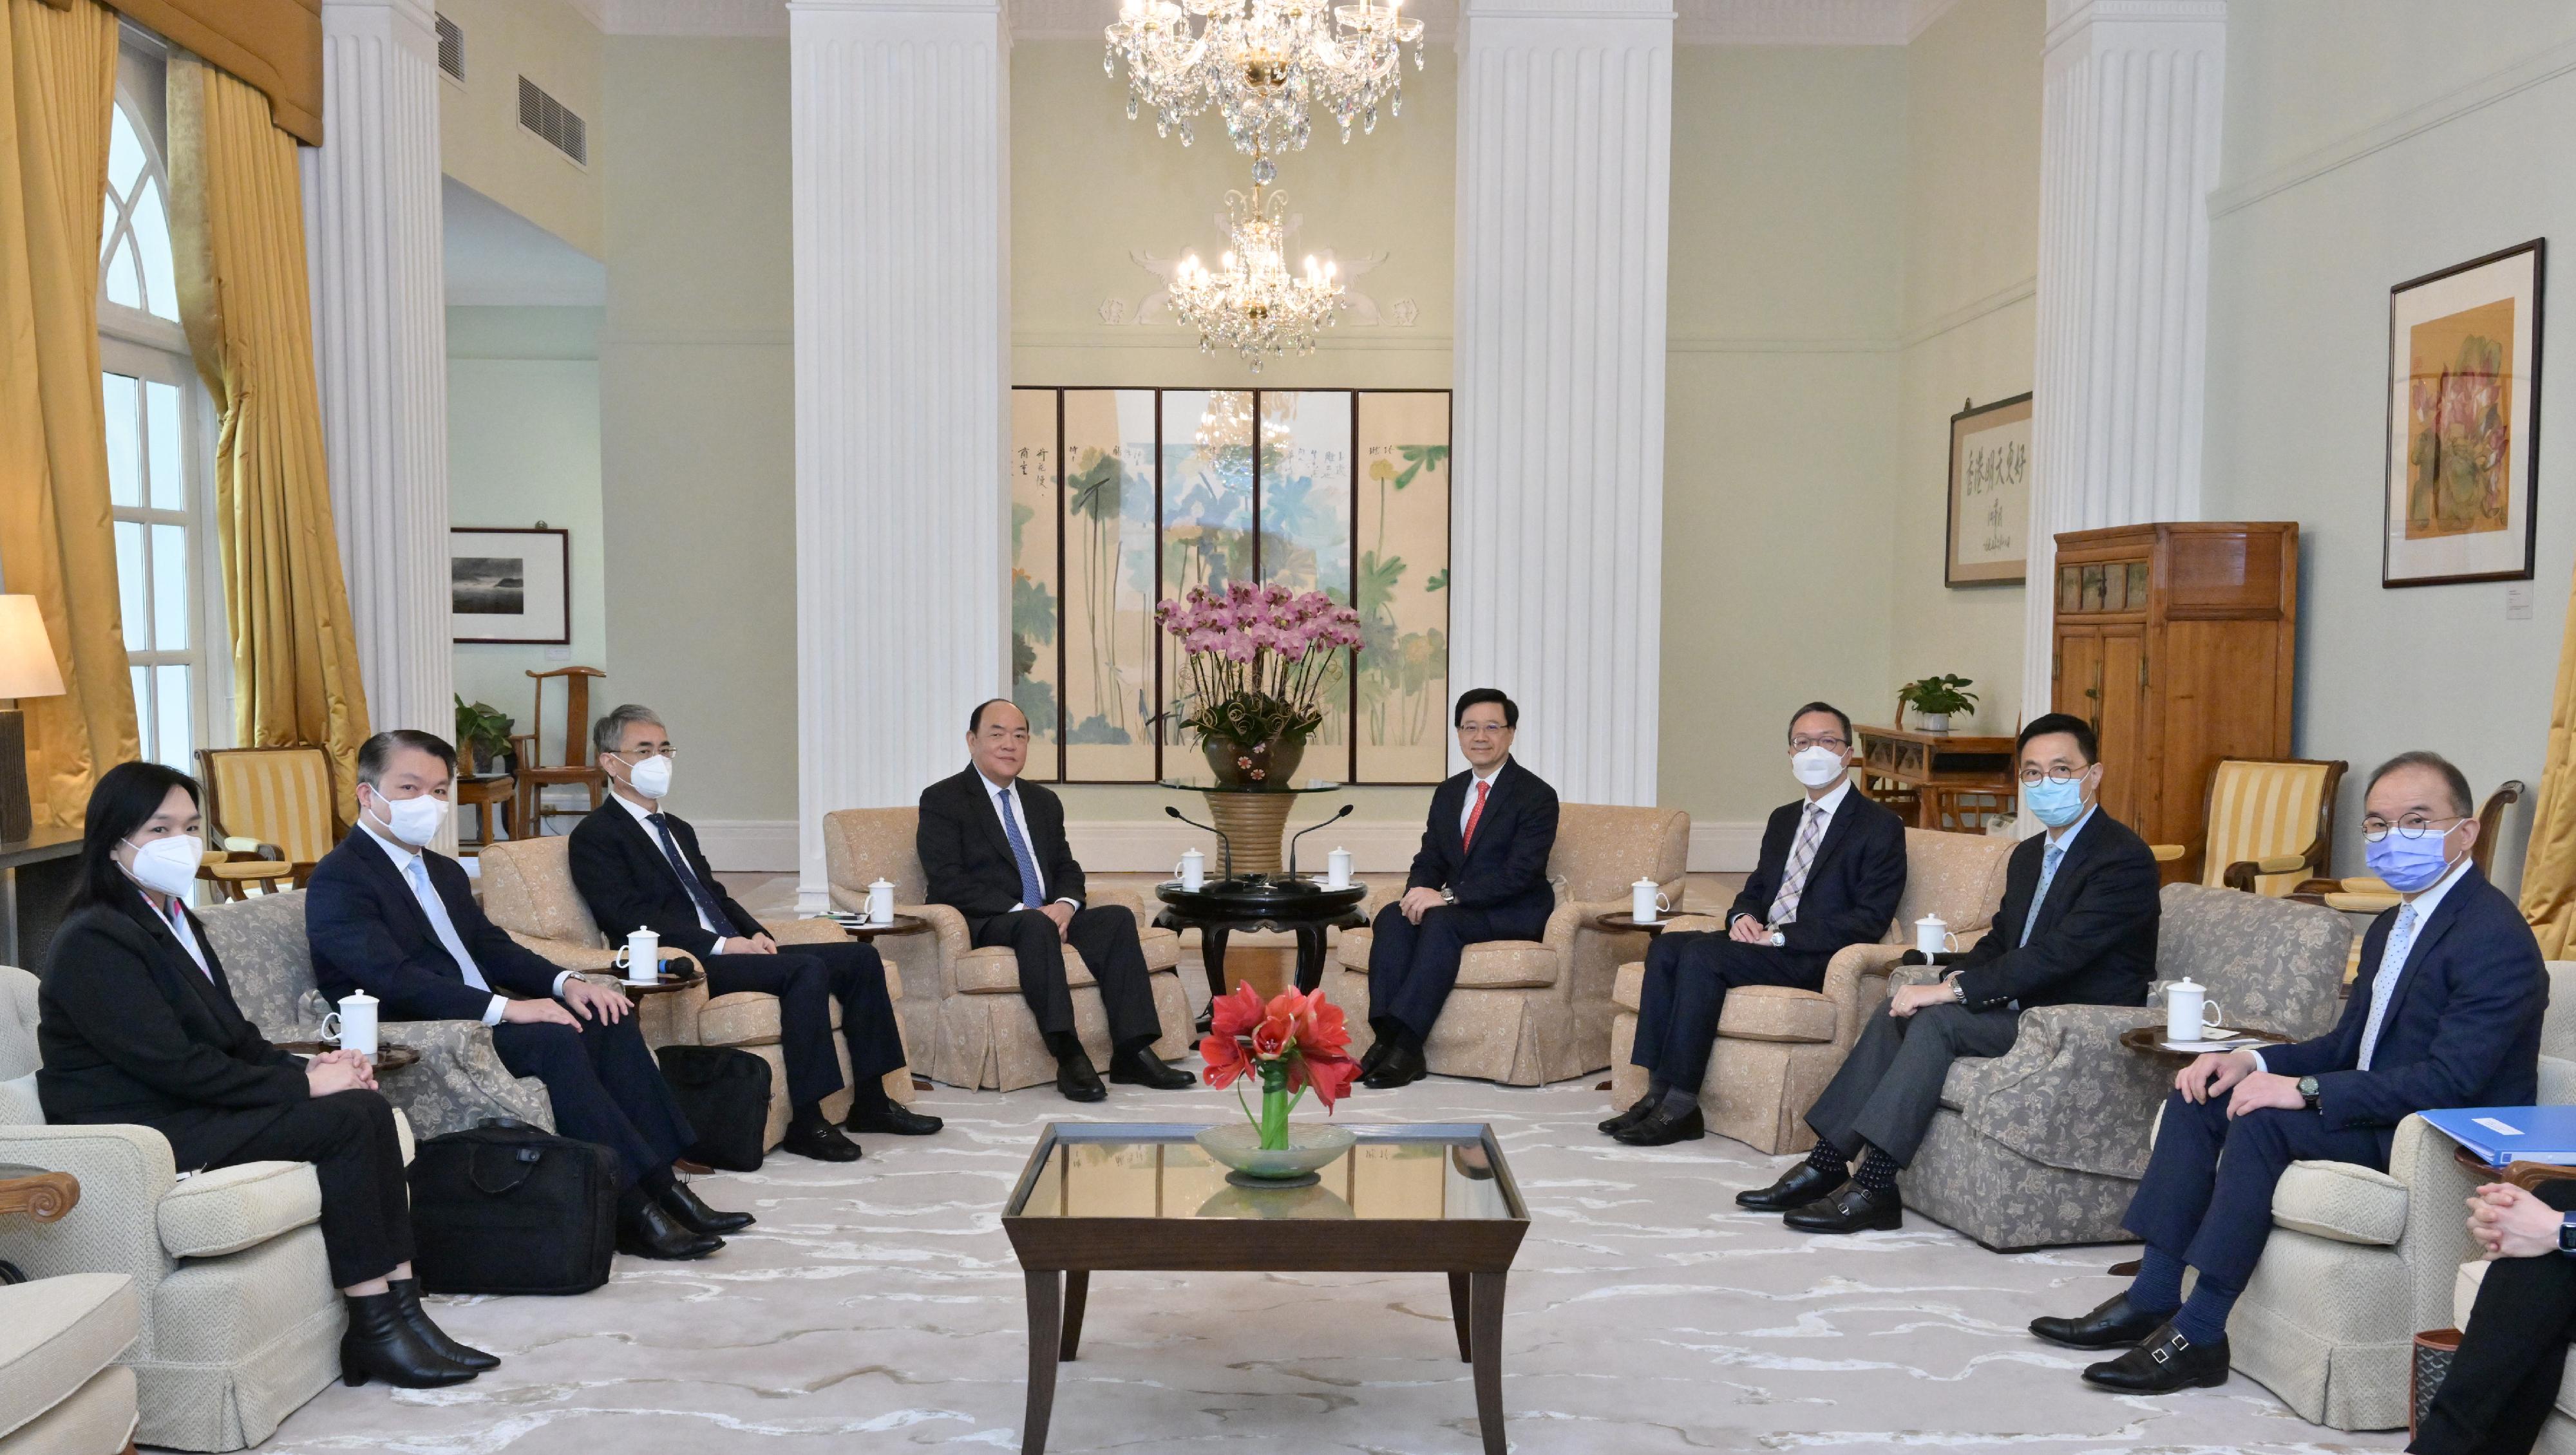 The Chief Executive, Mr John Lee (fourth right), met with the Chief Executive of the Macao Special Administrative Region, Mr Ho Iat-seng (fourth left), at Government House today (February 25). The Secretary for Justice, Mr Paul Lam, SC (third right); the Secretary for Culture, Sports and Tourism, Mr Kevin Yeung (second right); the Secretary for Constitutional and Mainland Affairs, Mr Erick Tsang Kwok-wai (first right), and the Director of the Chief Executive's Office, Ms Carol Yip, also attended the meeting.